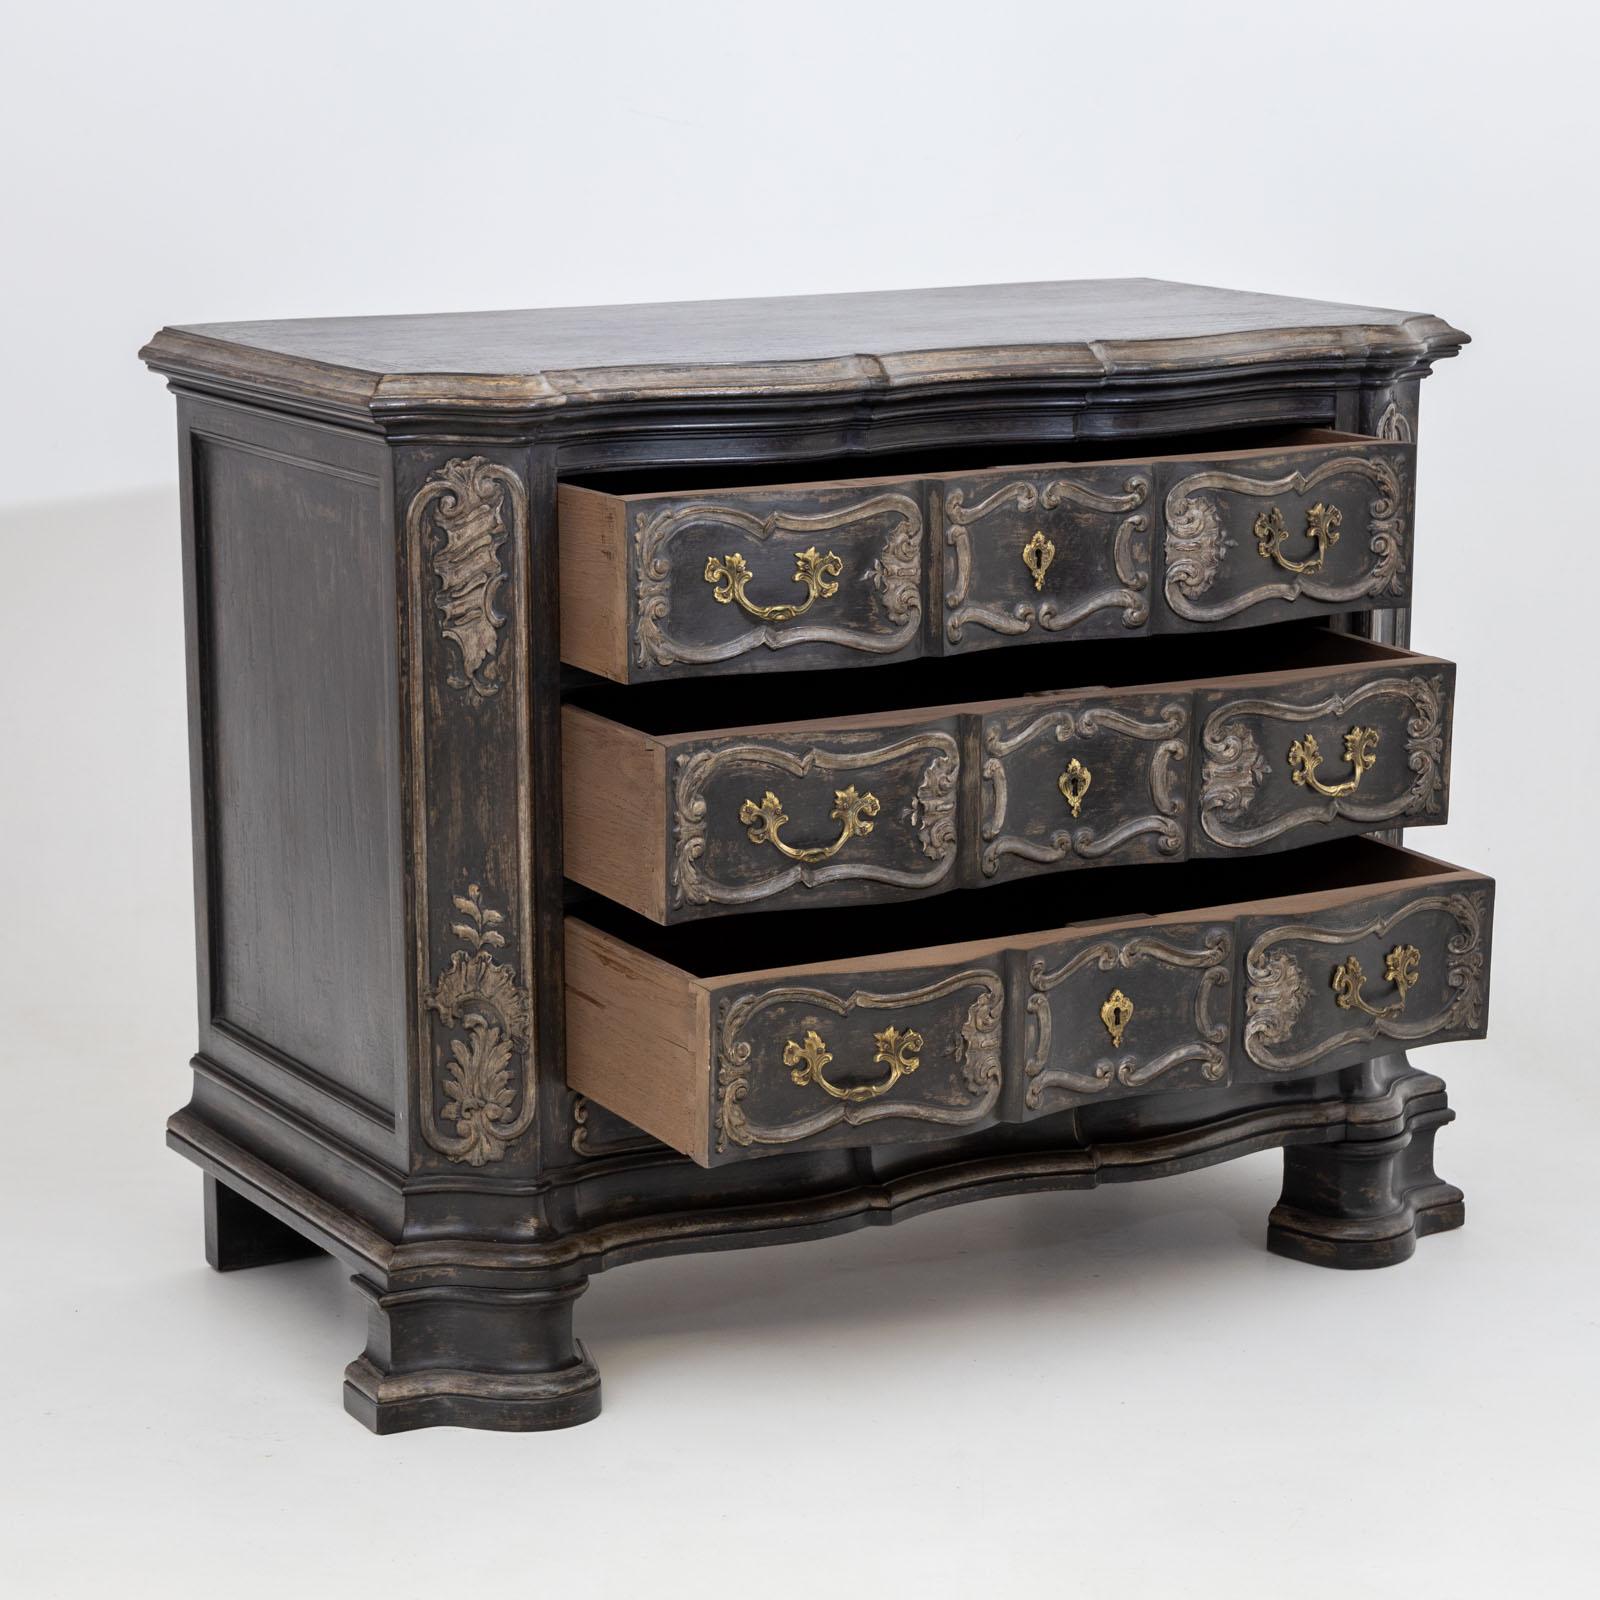 Large Baroque-style chest of drawers with three drawers and a curved front. The chest of drawers stands on wide profiled feet and is decorated with carved panelled decorations. The black and anthracite grey finish is new and has been given an